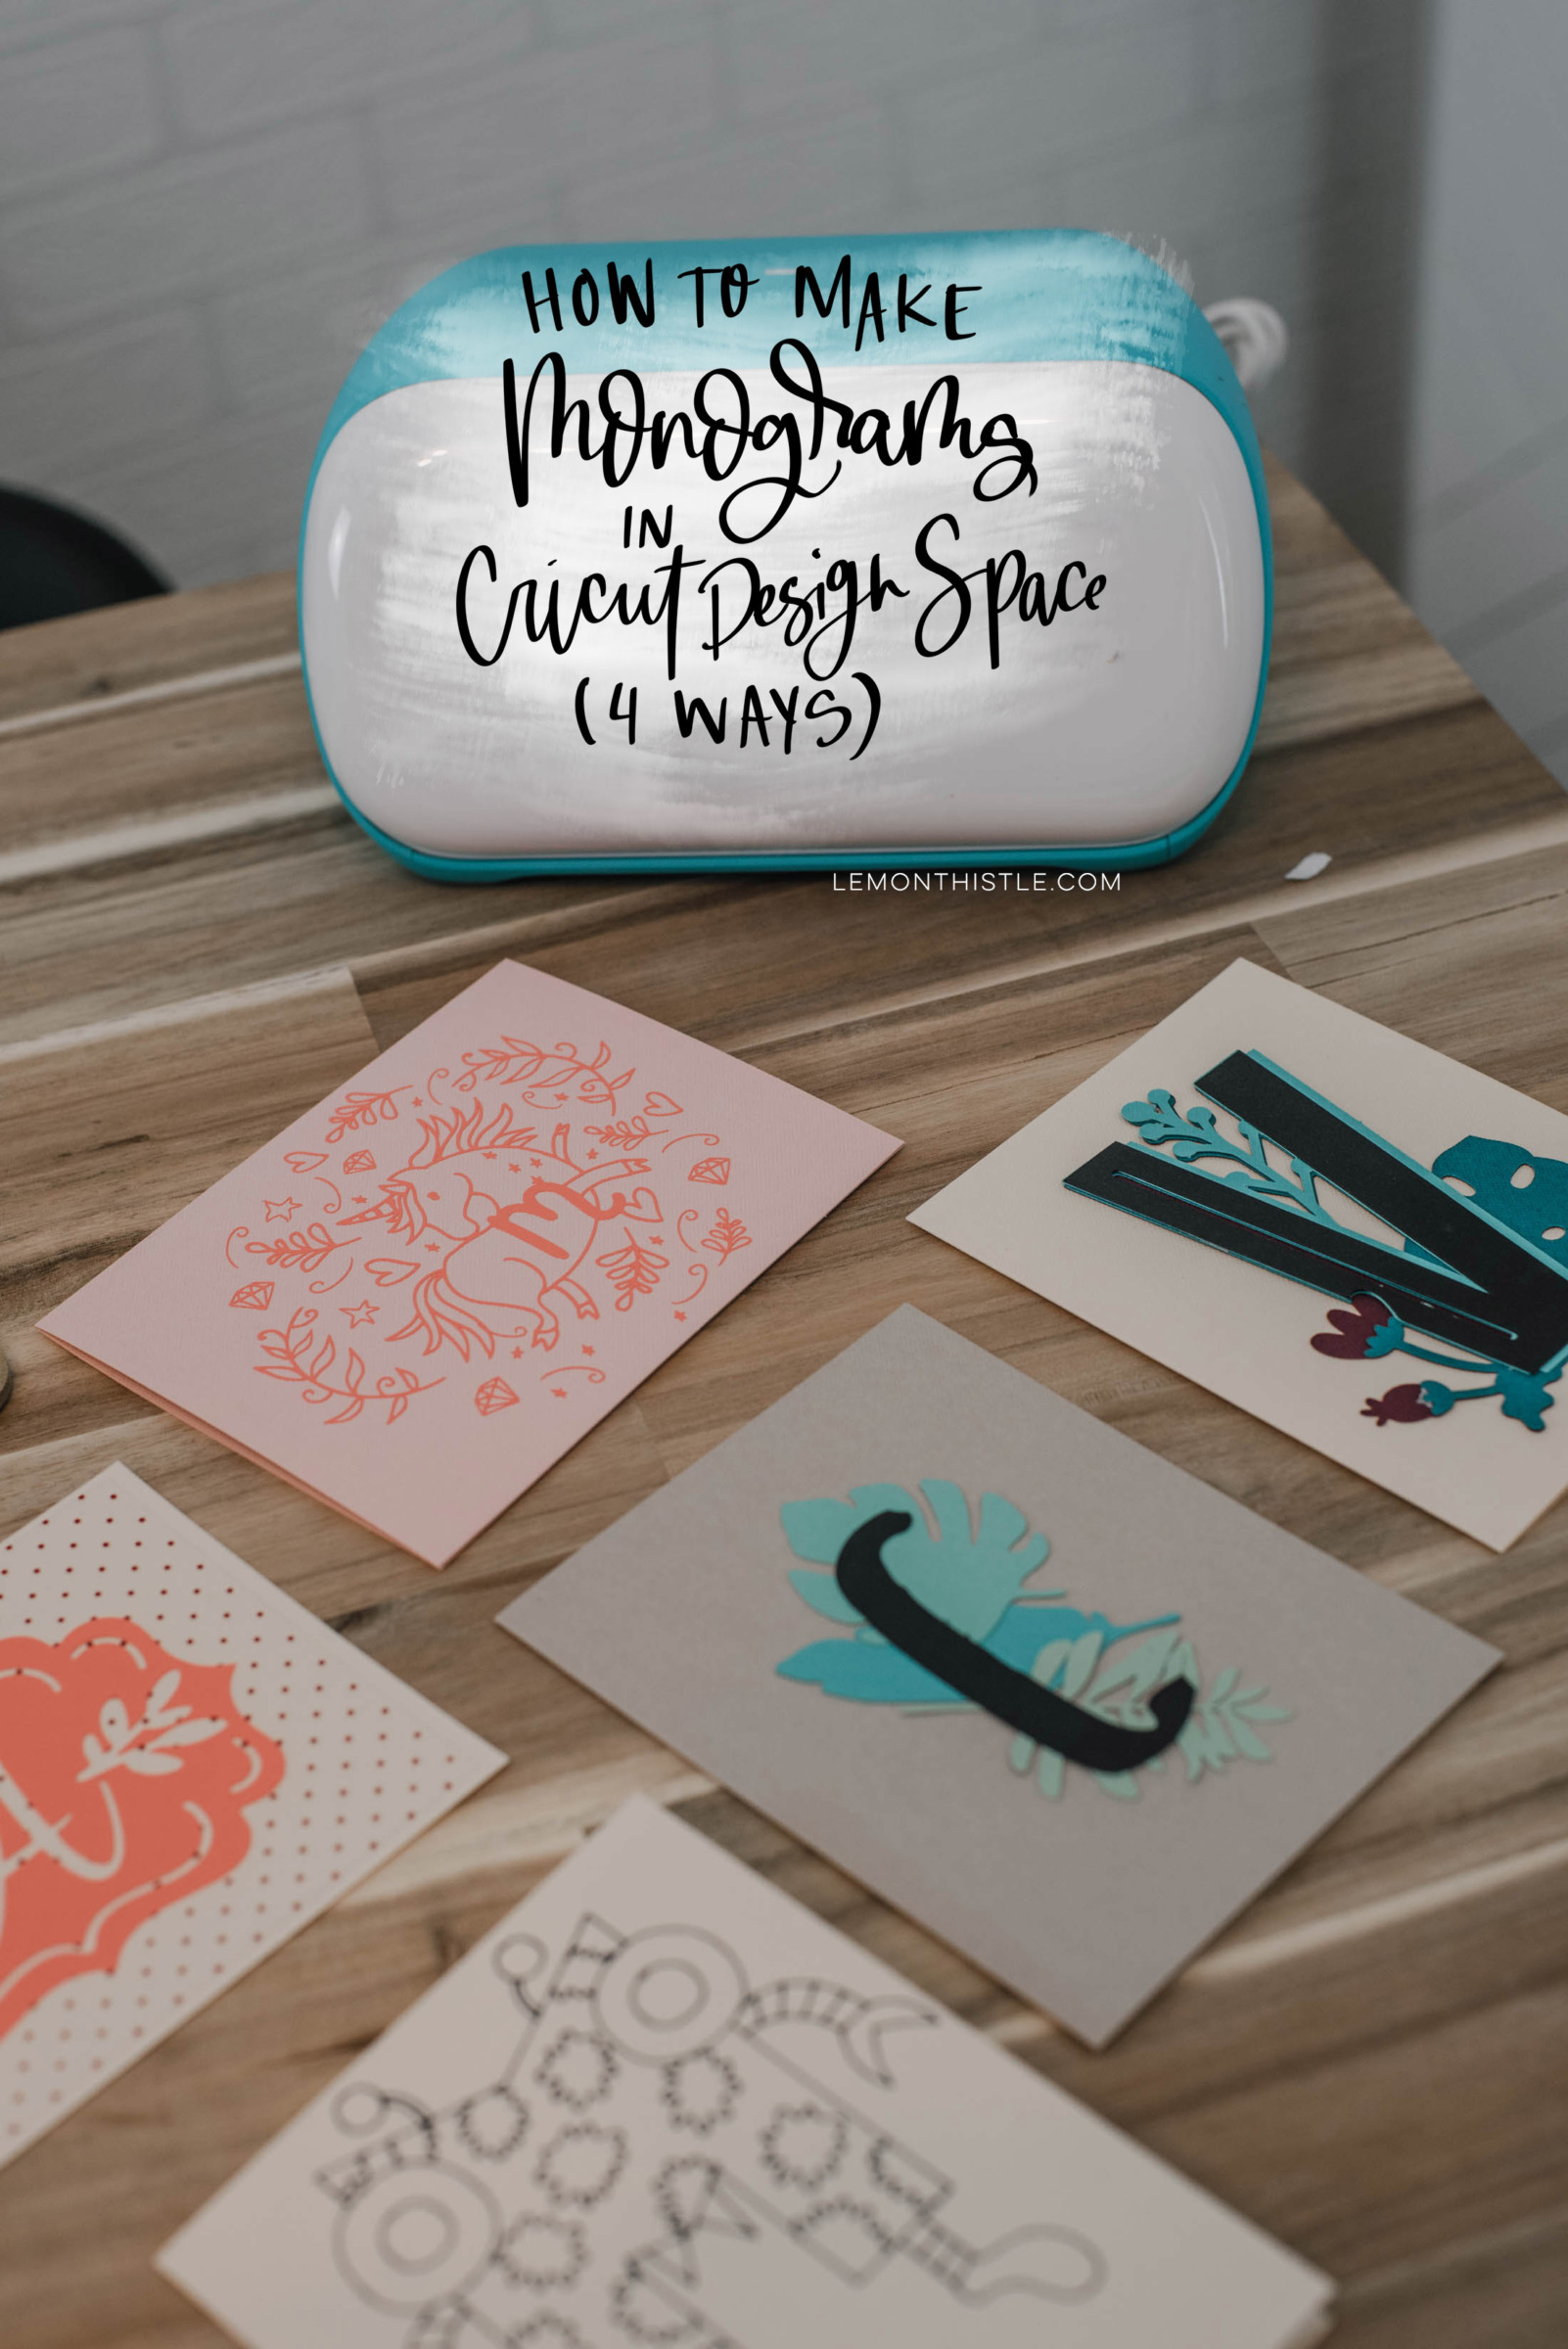 How to Make Monograms In Cricut Design Space